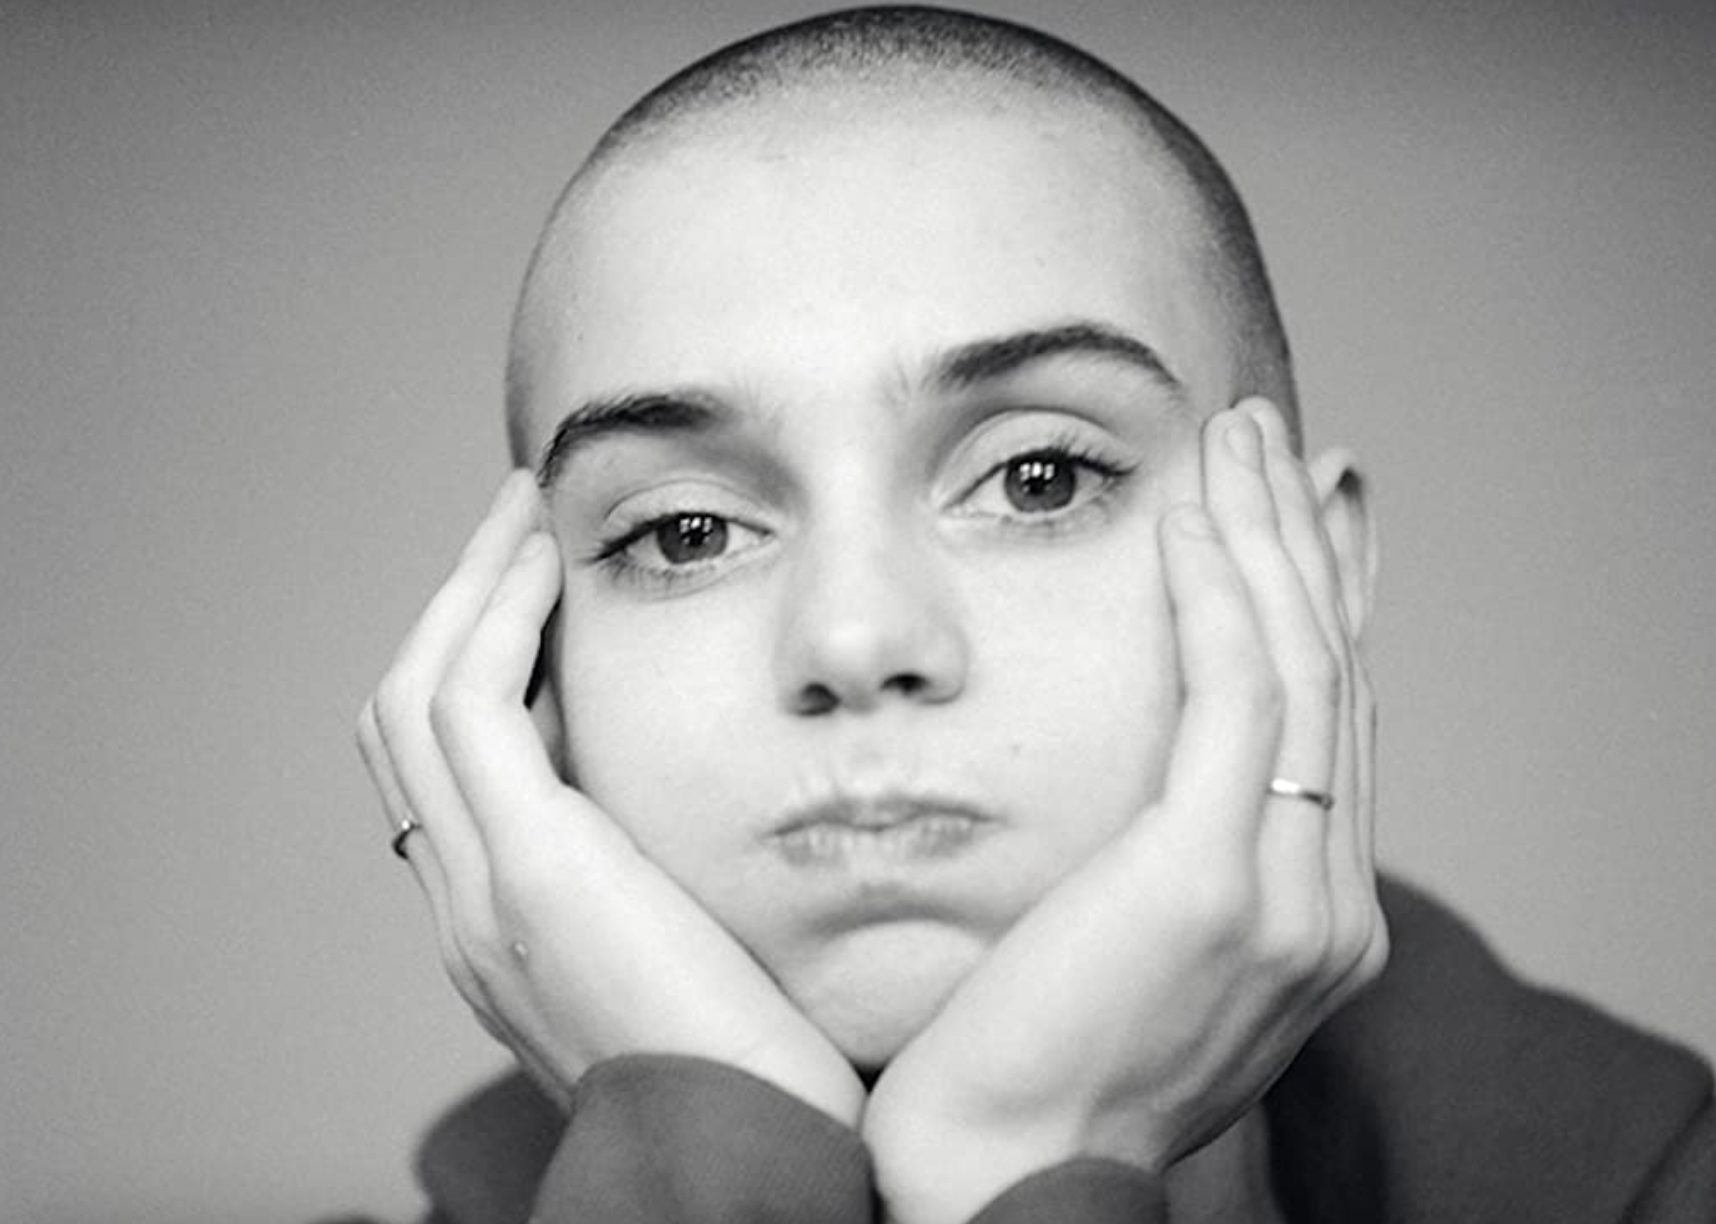 Sinéad O'Connor in the documentary "Nothing Compares."